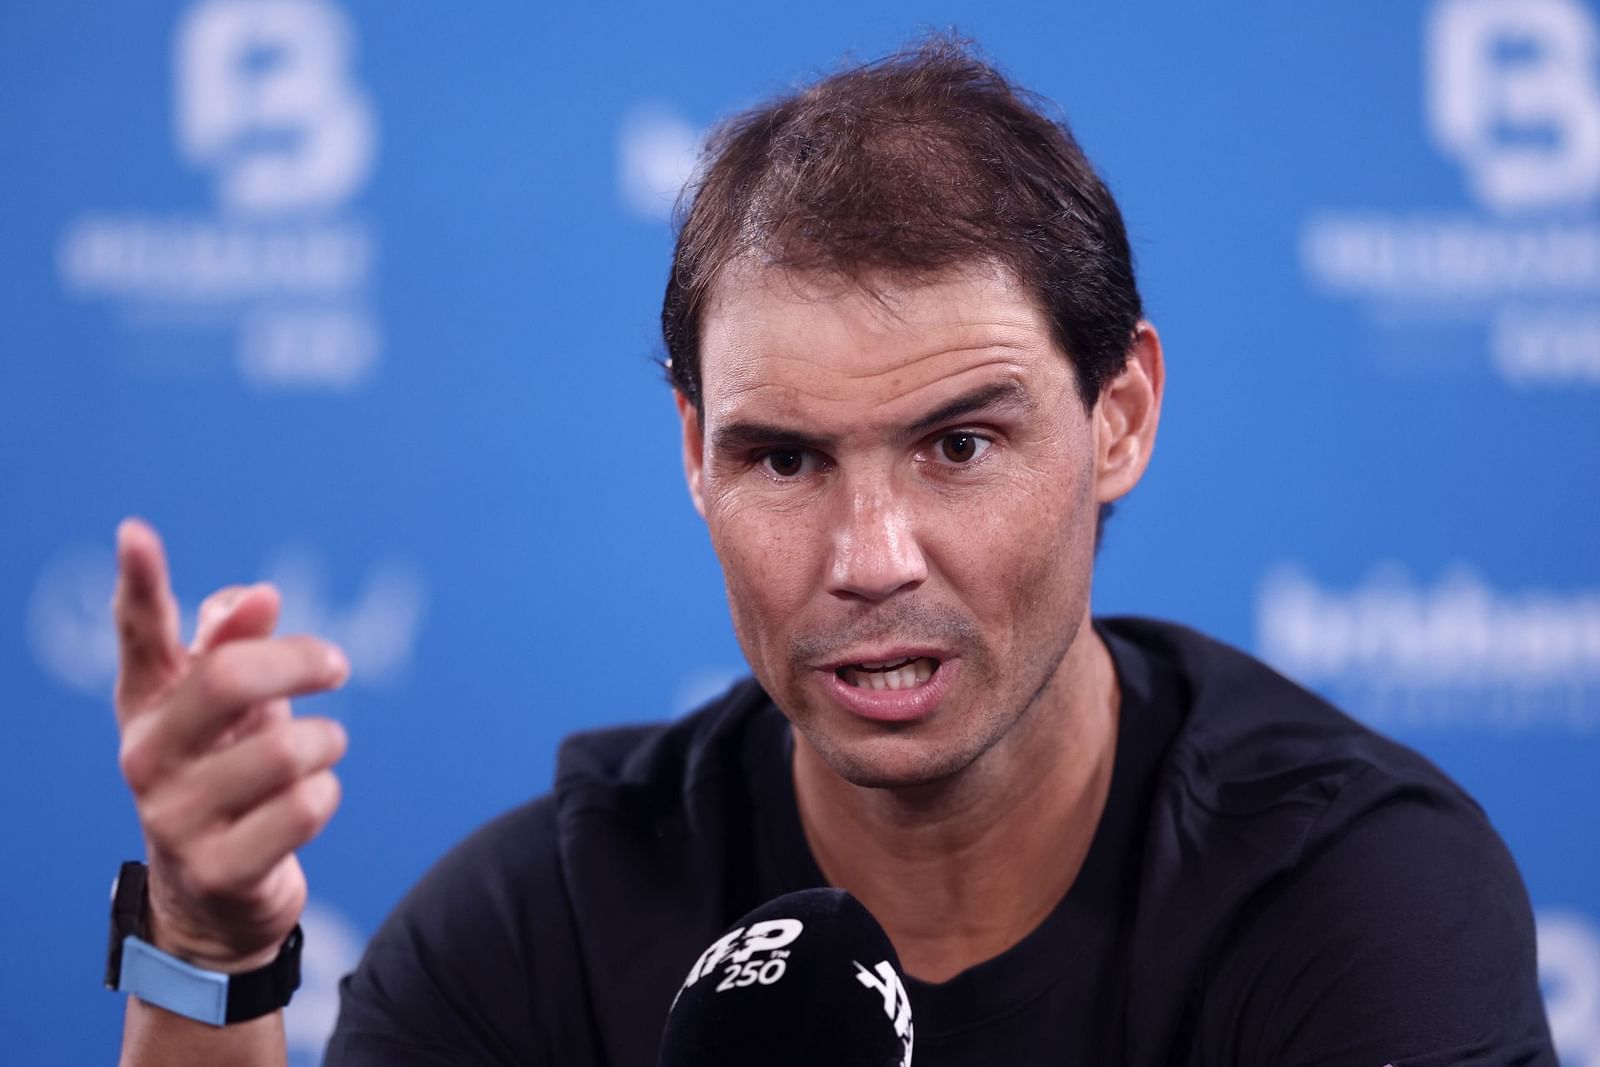 "I would like to have clear vision, but I don't" Rafael Nadal maintains air of uncertainty